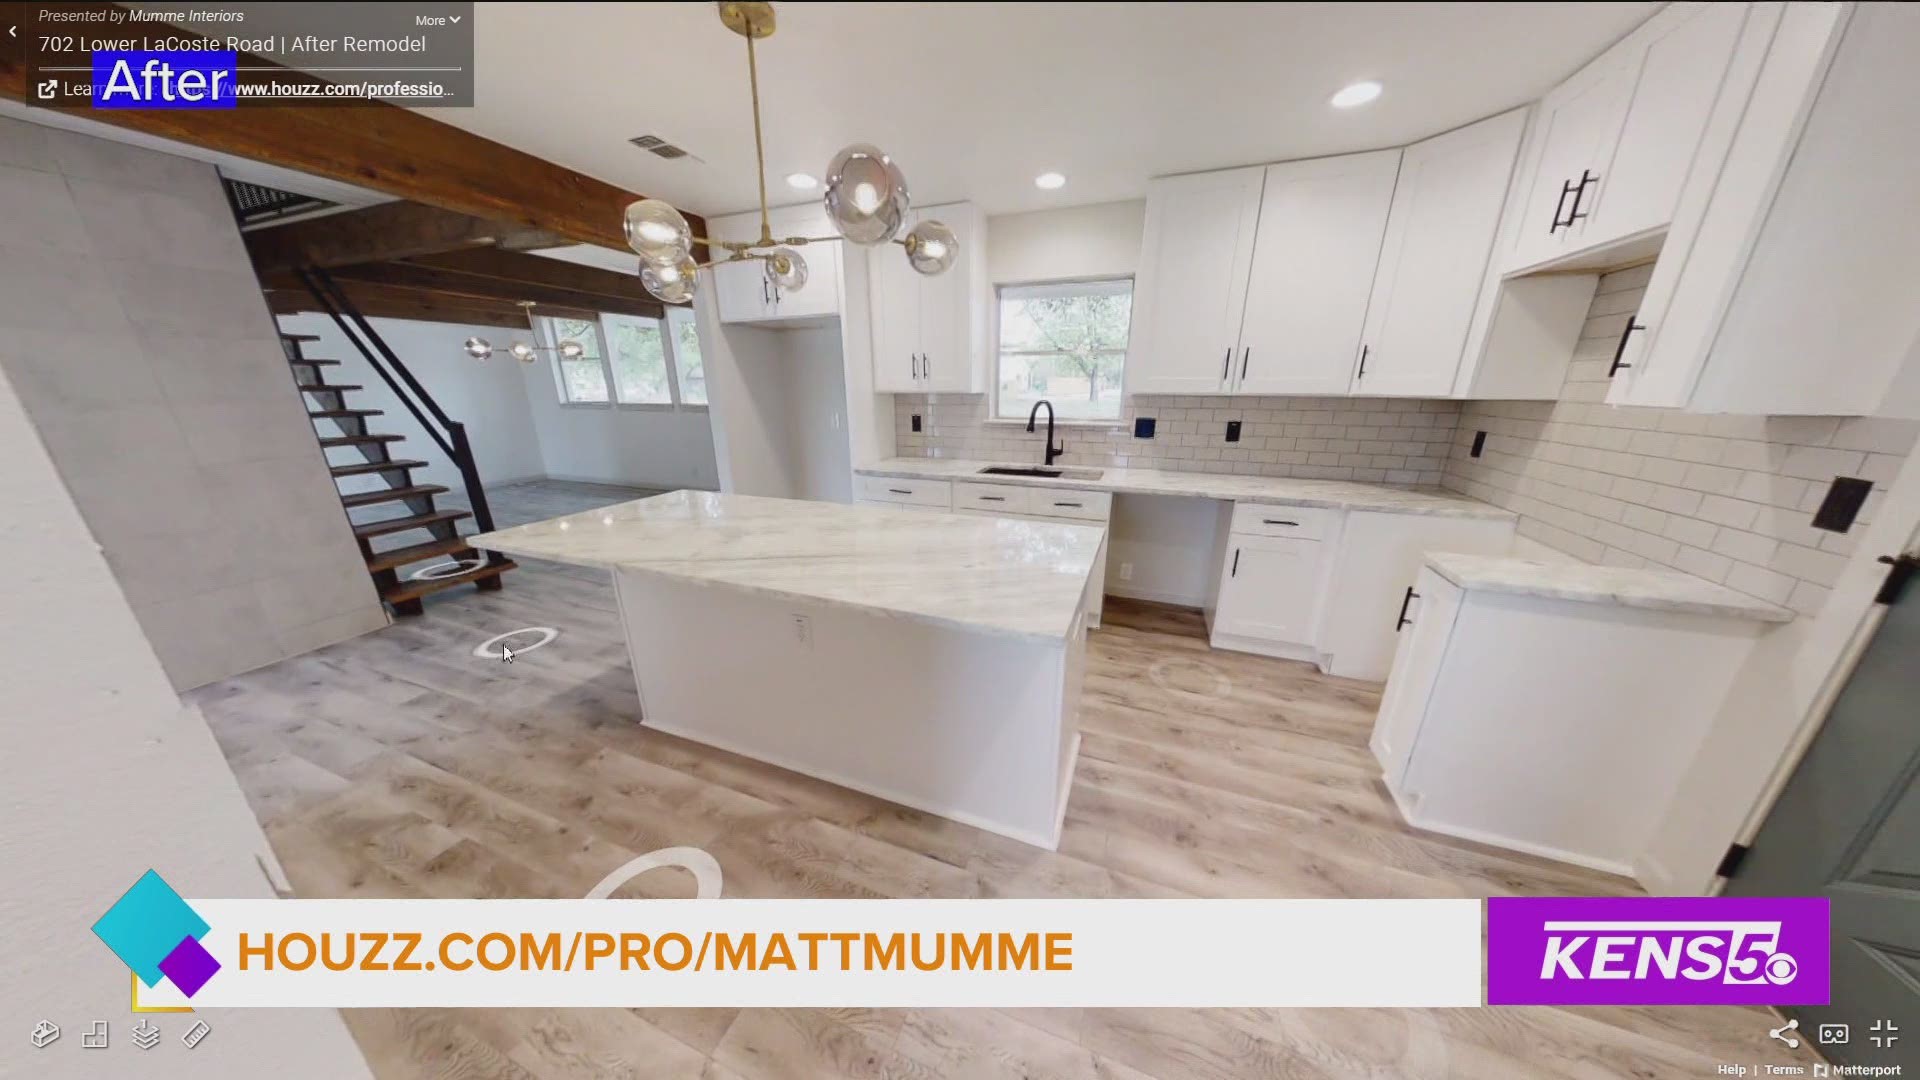 Matthew Mumme shows his finished property renovation after months of working on it from start to finish!